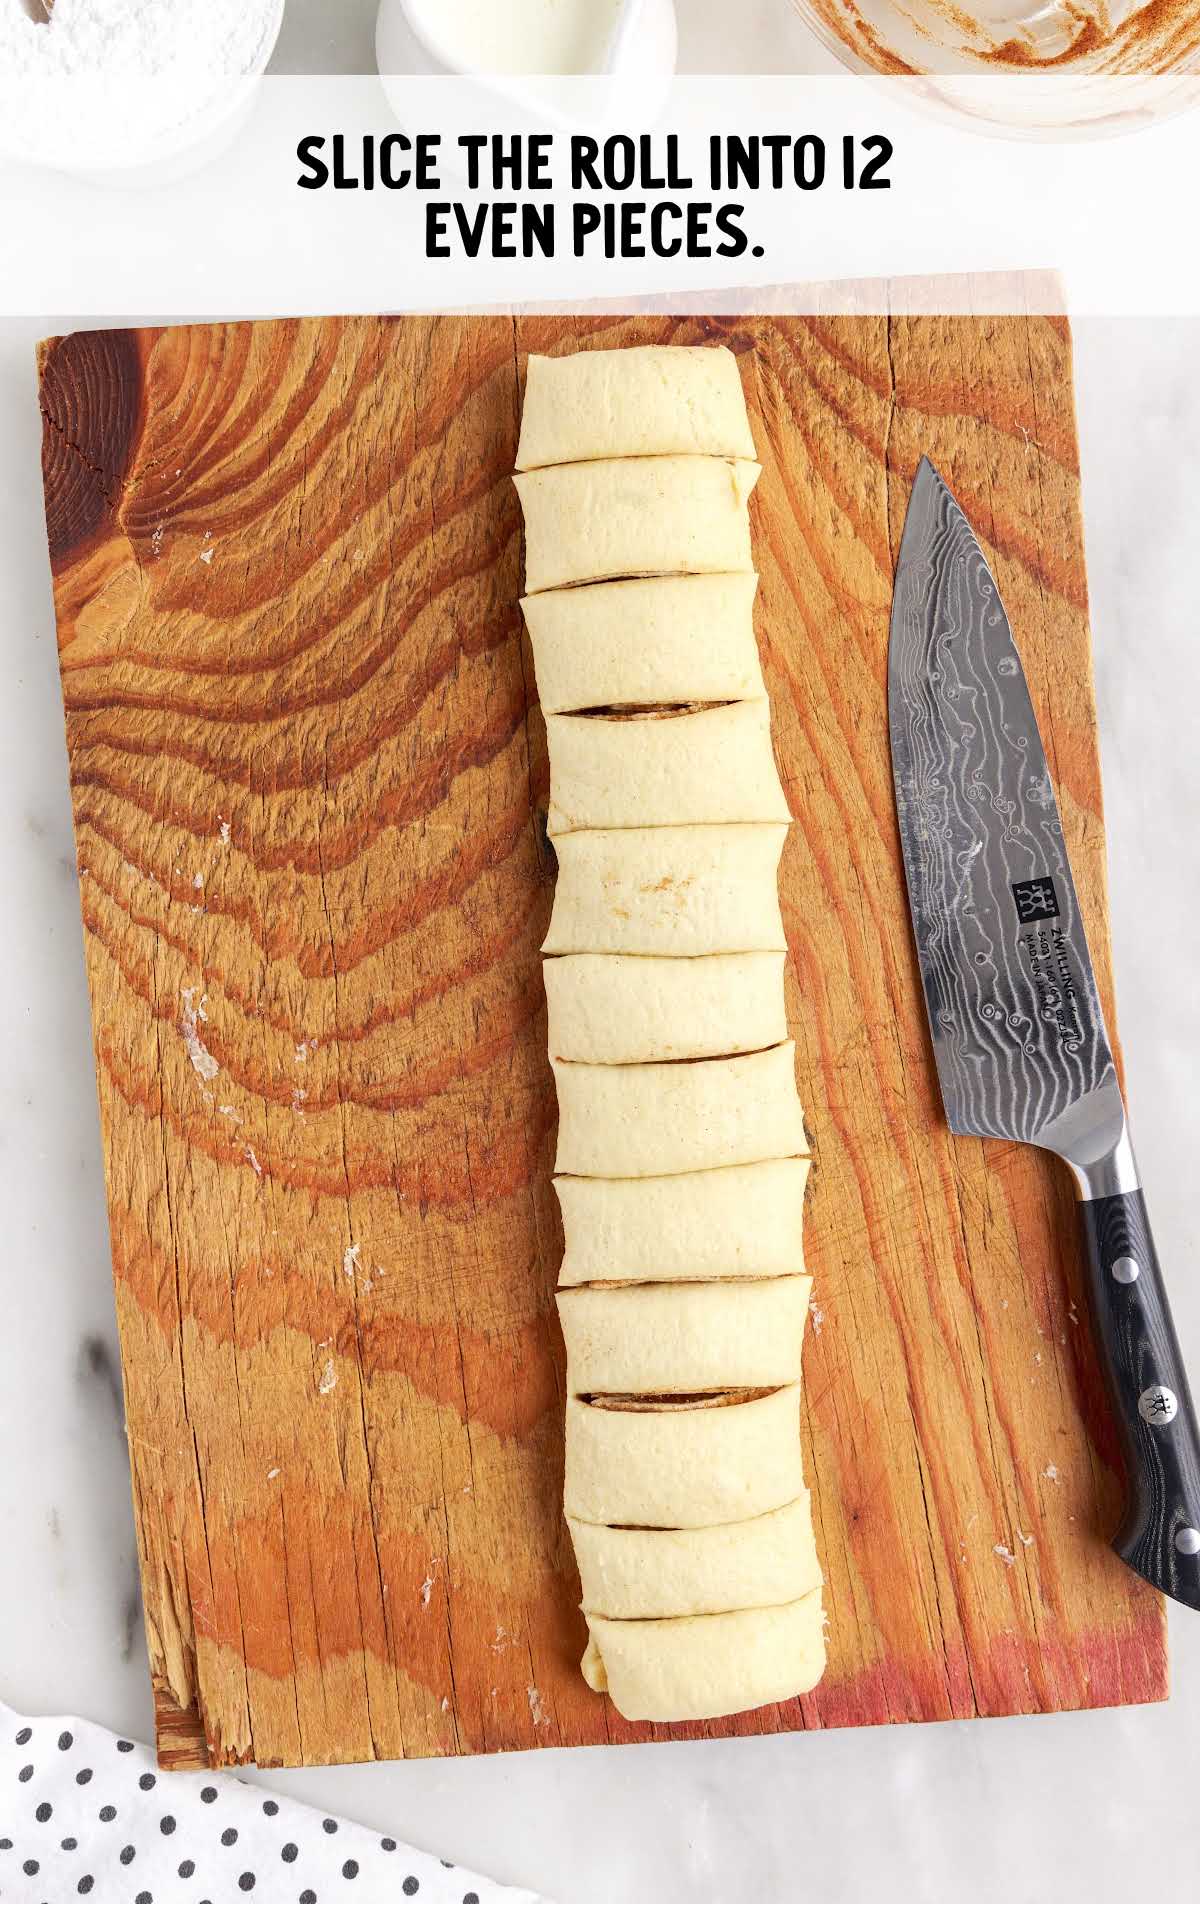 roll sliced into 12 pieces on a cutting board